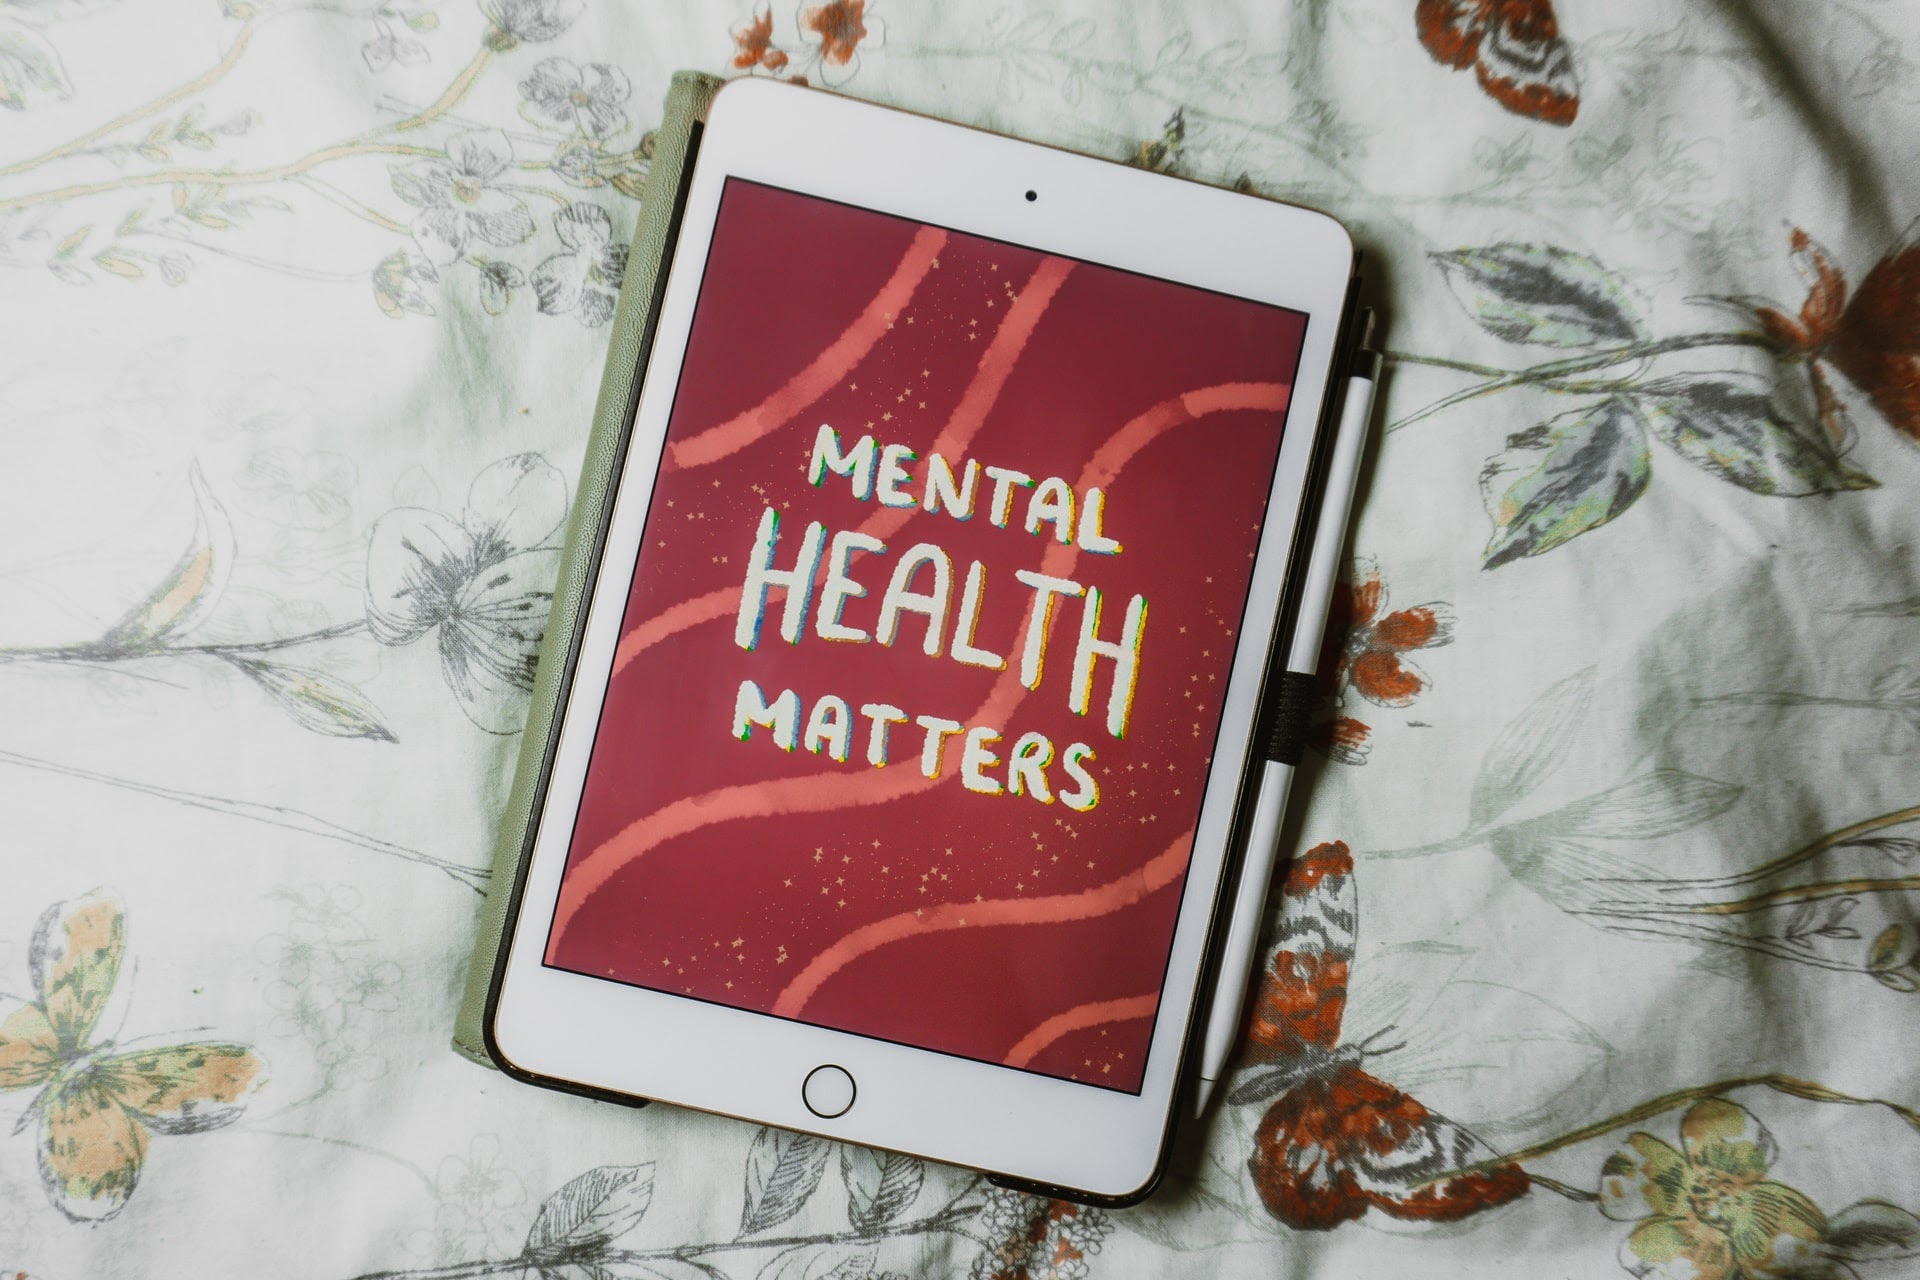 iPad with a hand drawn "mental health matters" graphic.